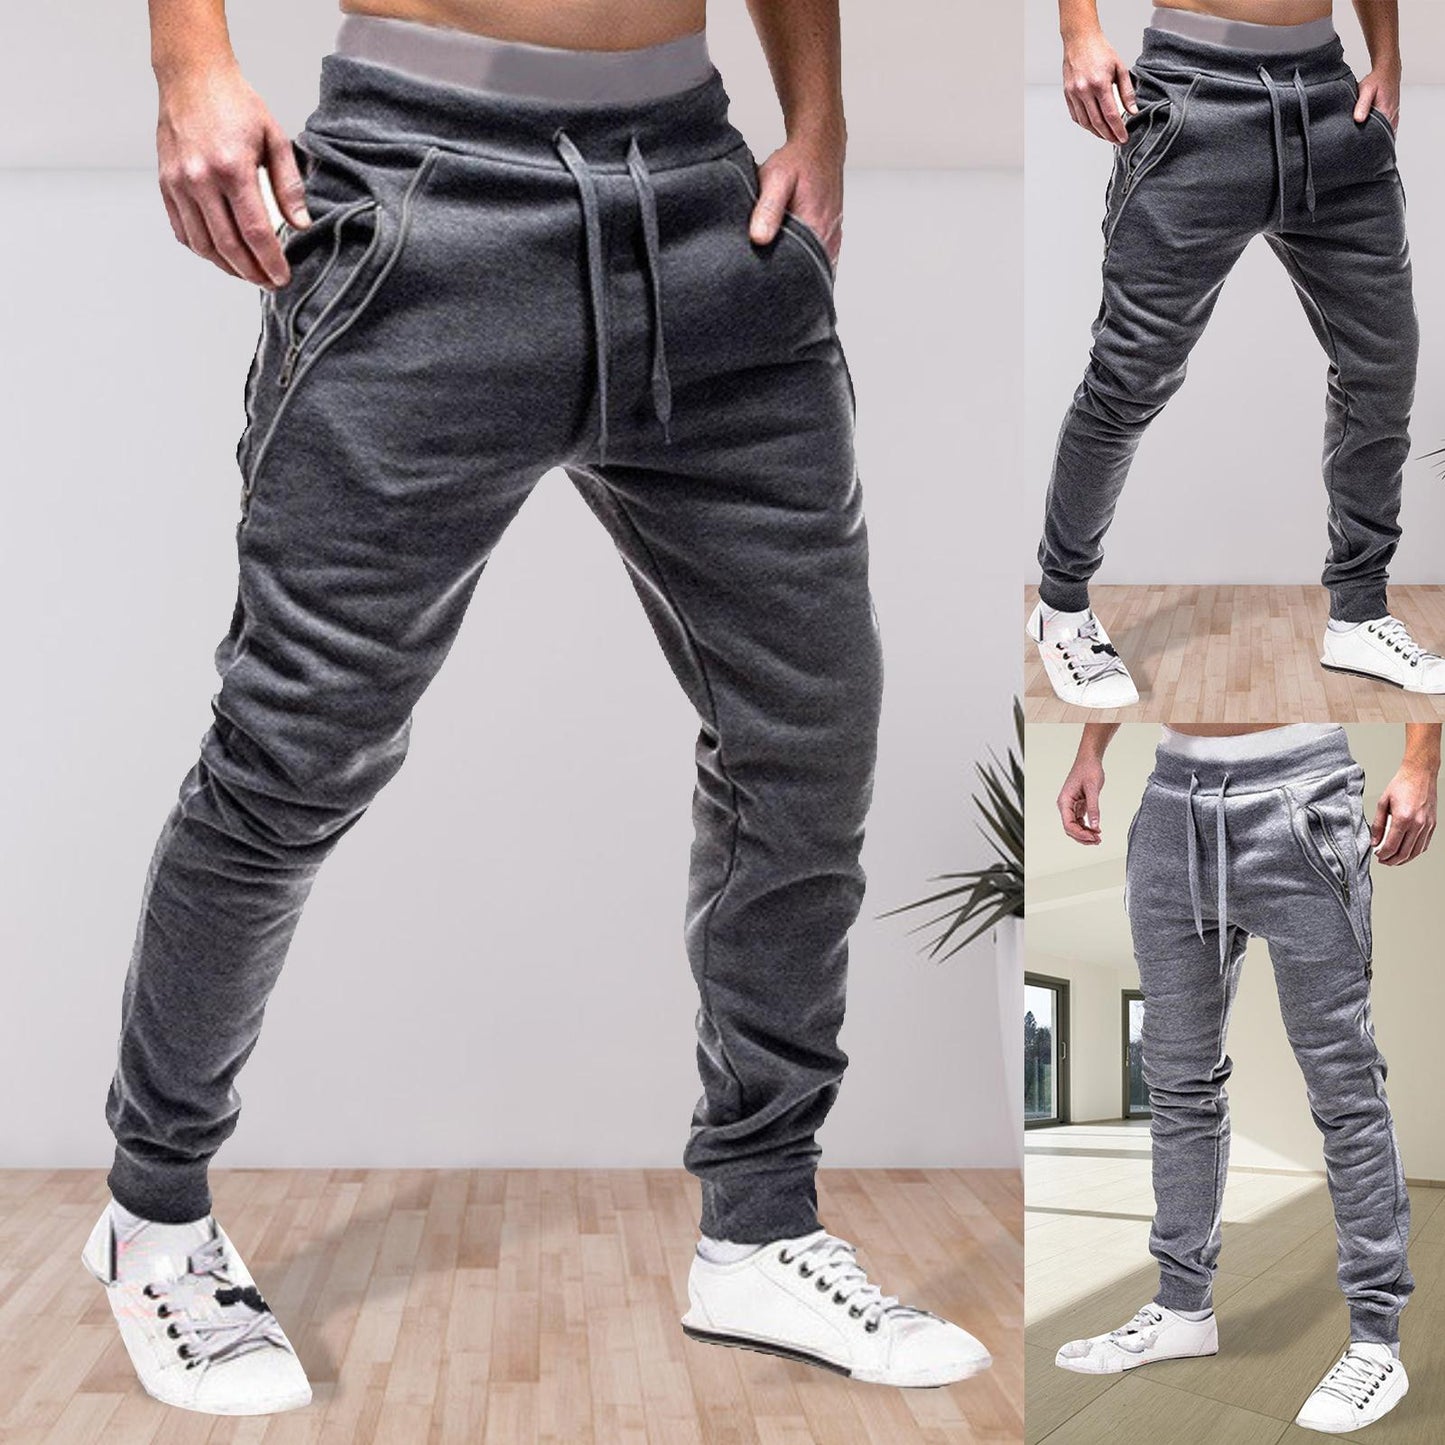 Drawstring Zipper Ankle Tied Sweatpants - Forever Growth 